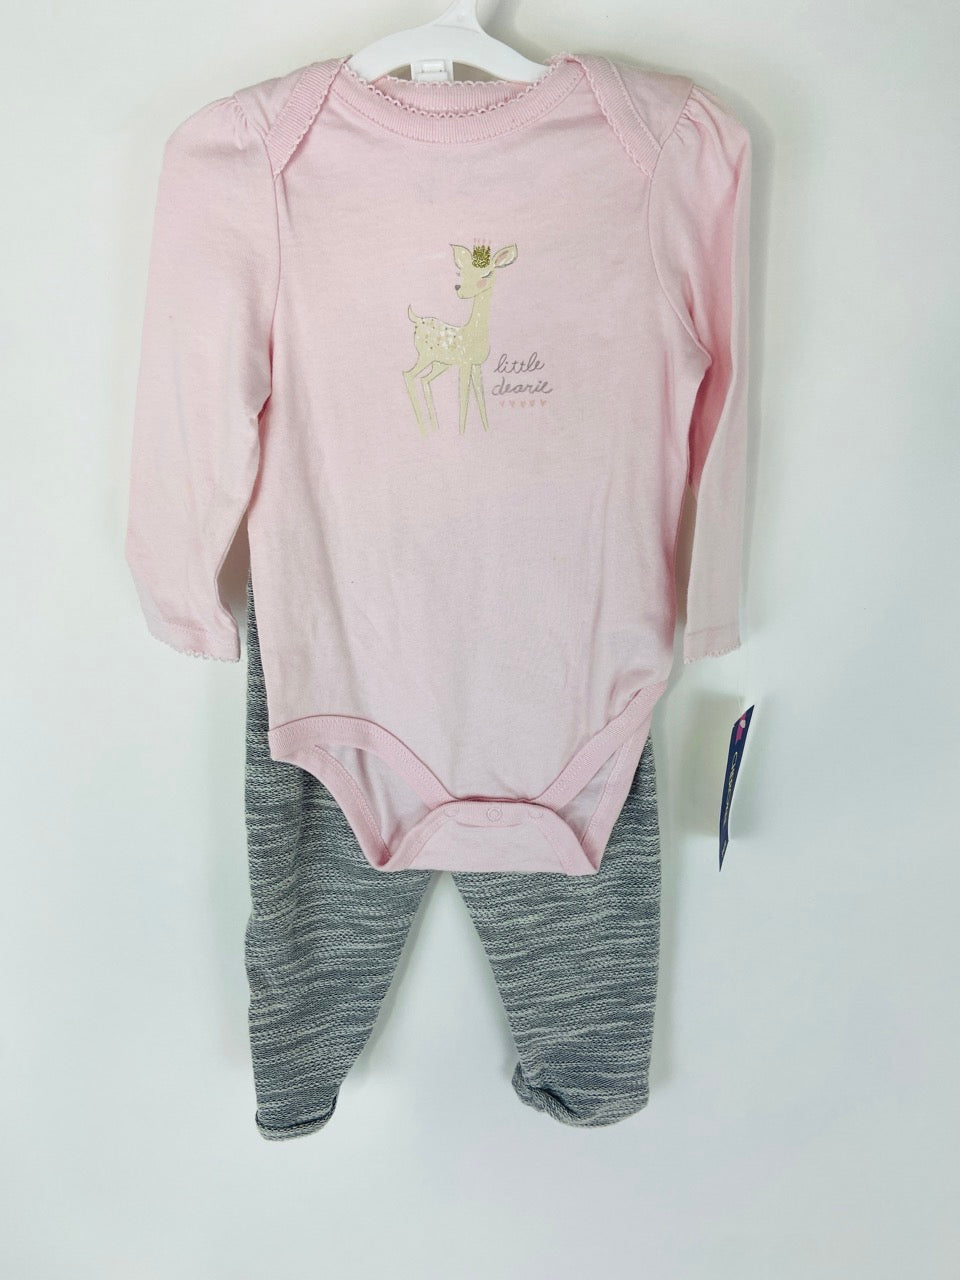 NWT- Little Dearie Two Piece Outfit- 6/9 Months